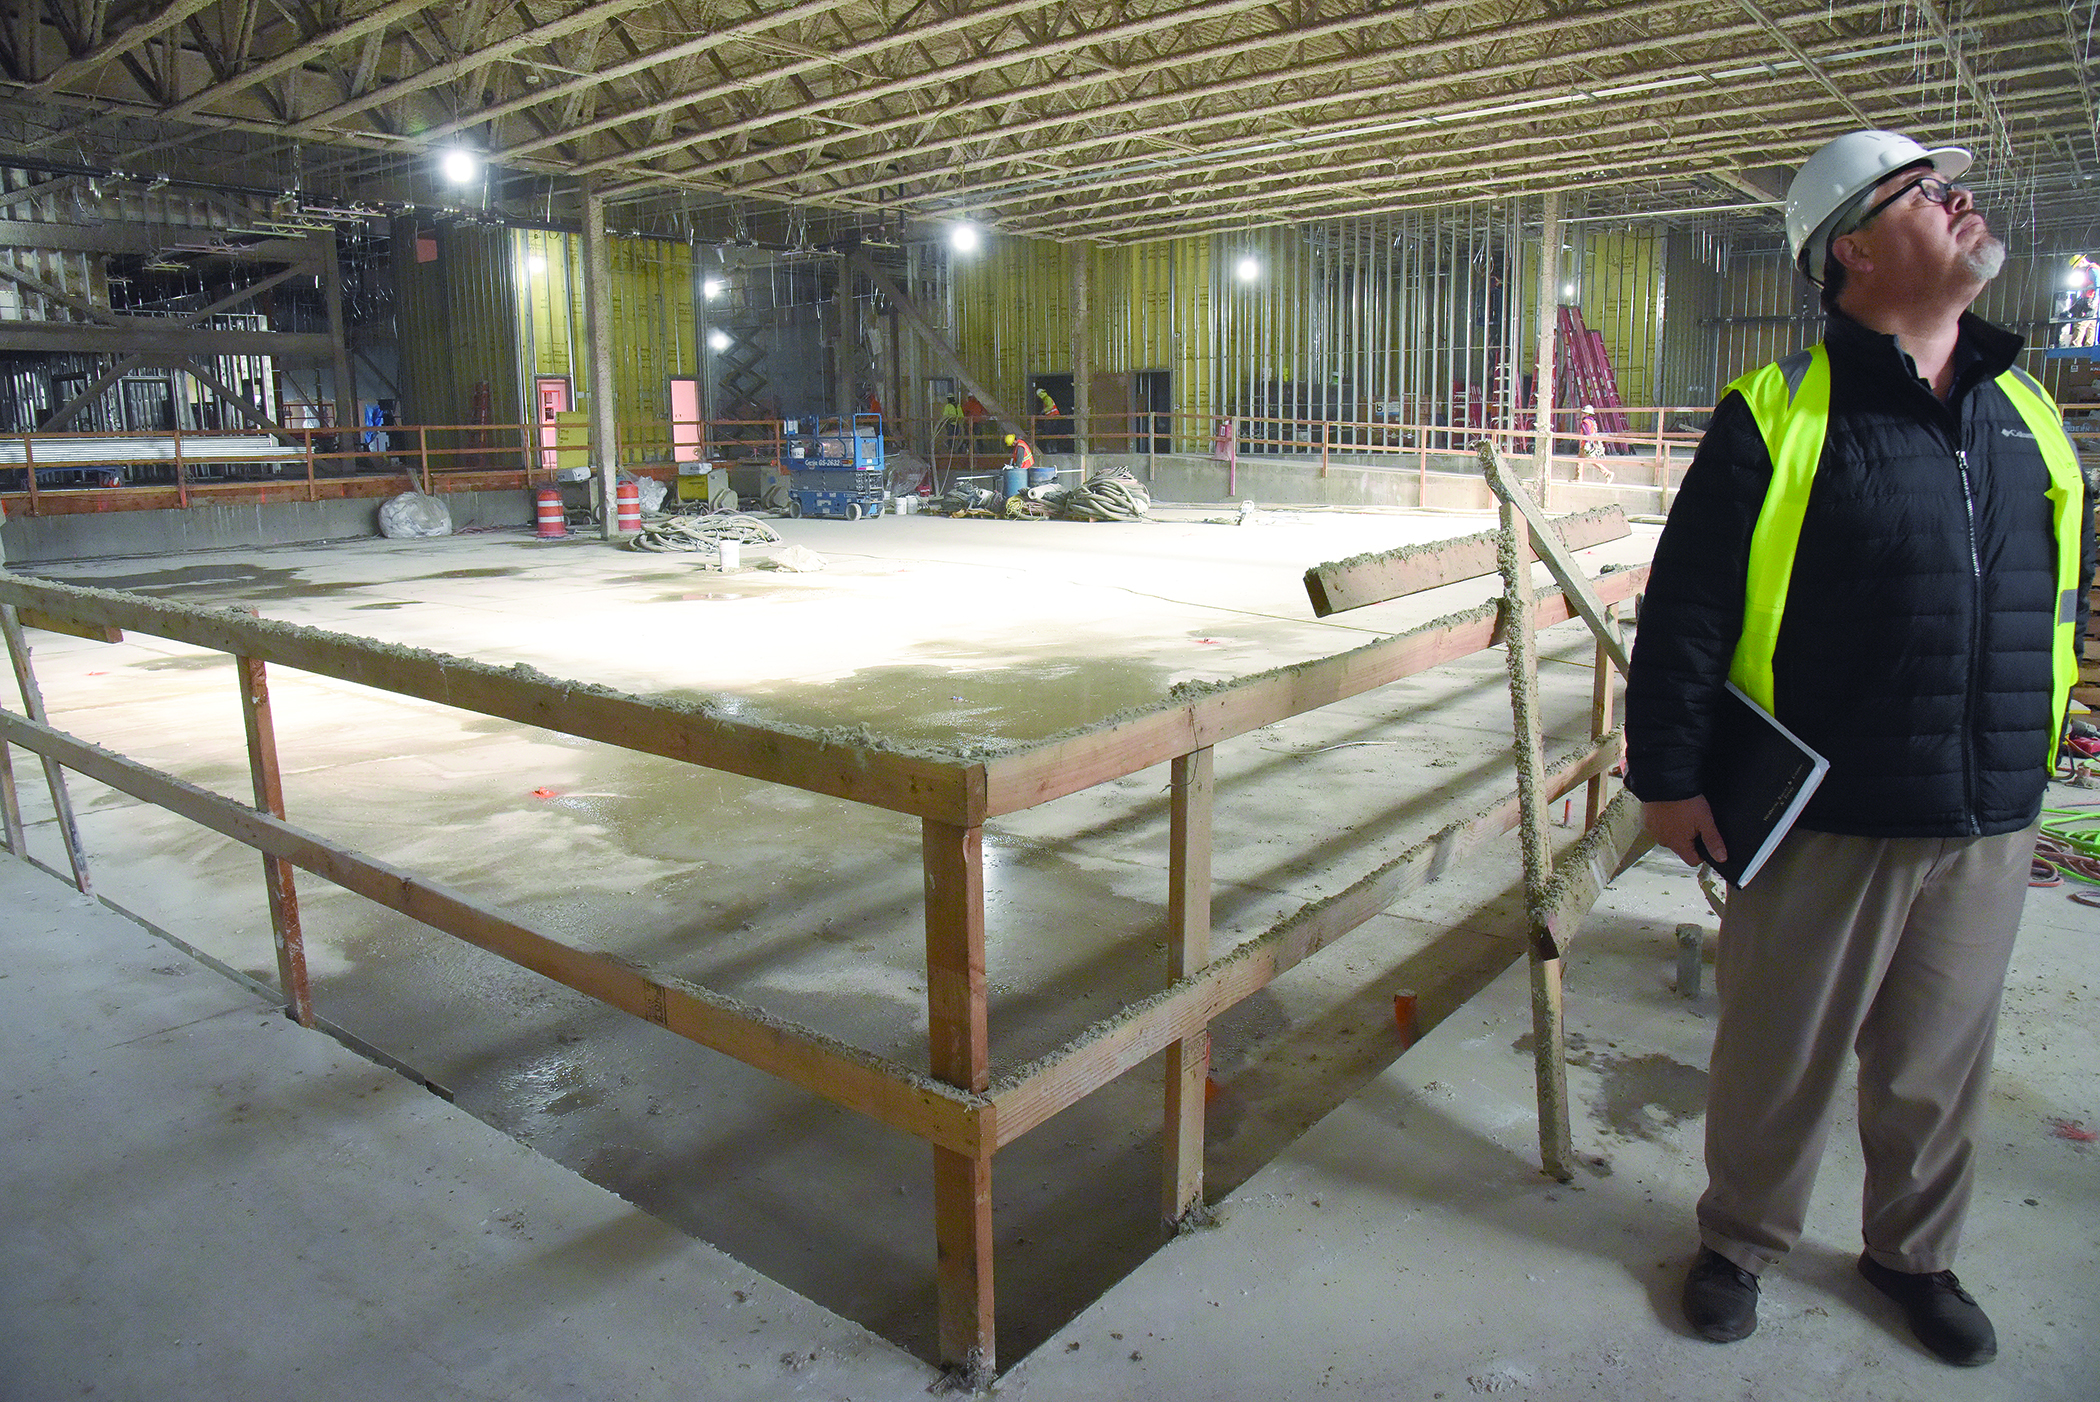 Inside a building under construction. A man, Dave Tovey, is on the far right of the frame wearing a hard hat and neon vest.